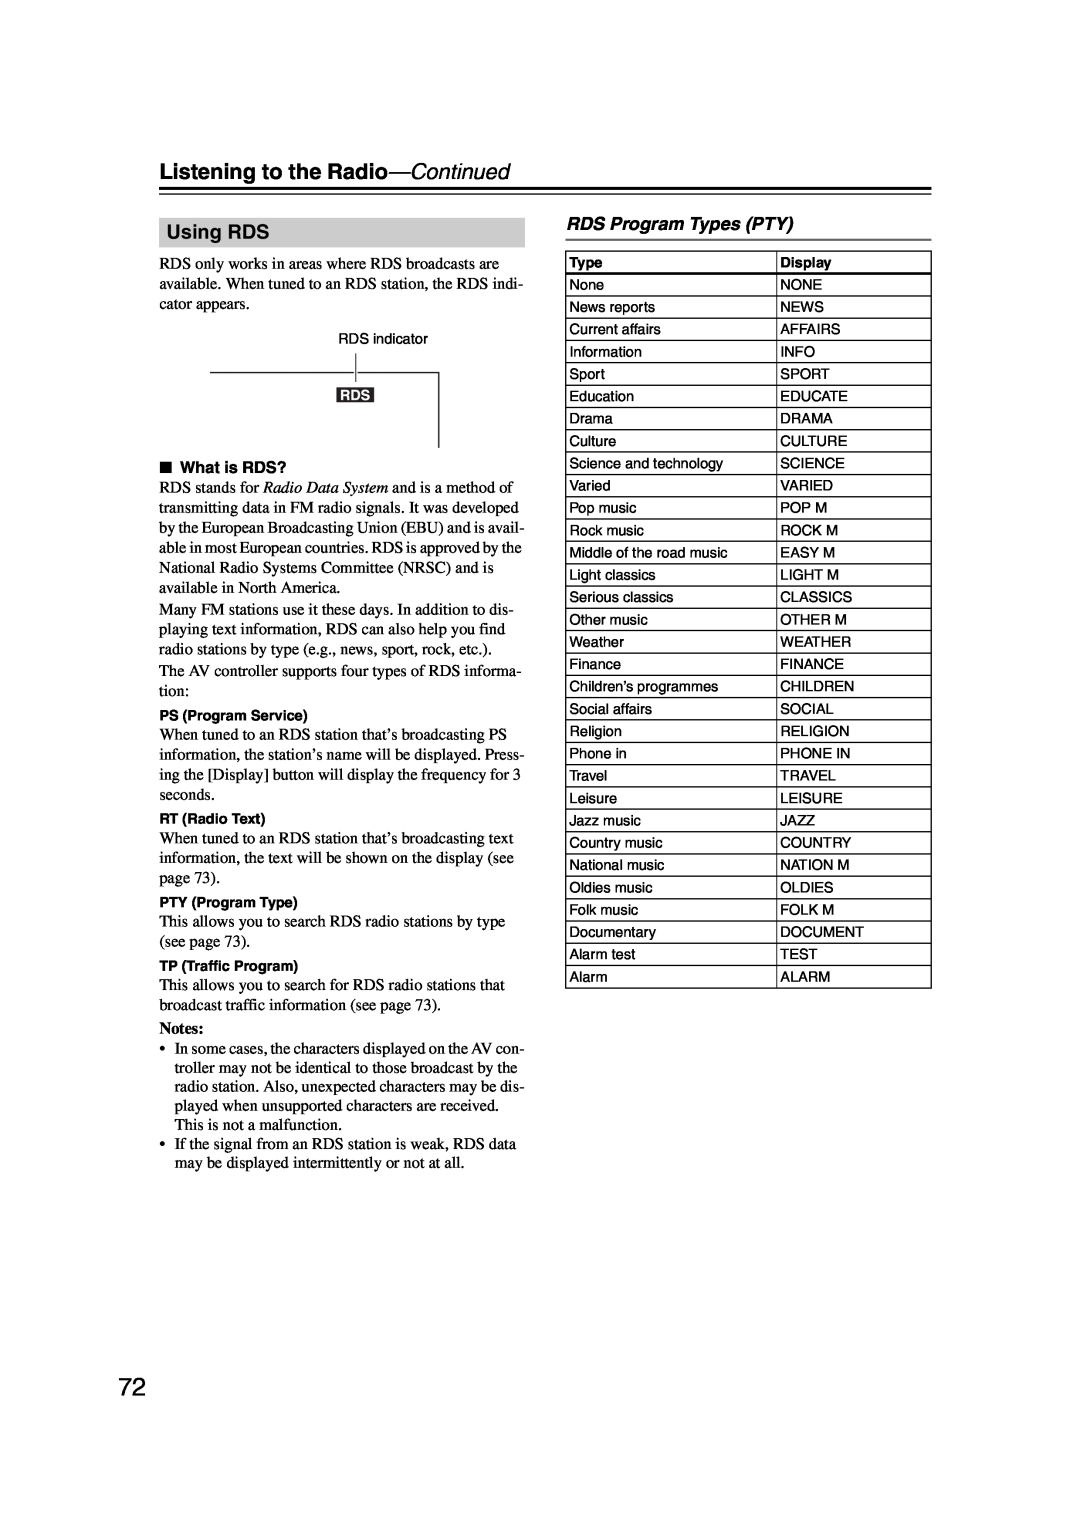 Integra DHC-9.9 instruction manual Using RDS, RDS Program Types PTY, Listening to the Radio—Continued, Notes 